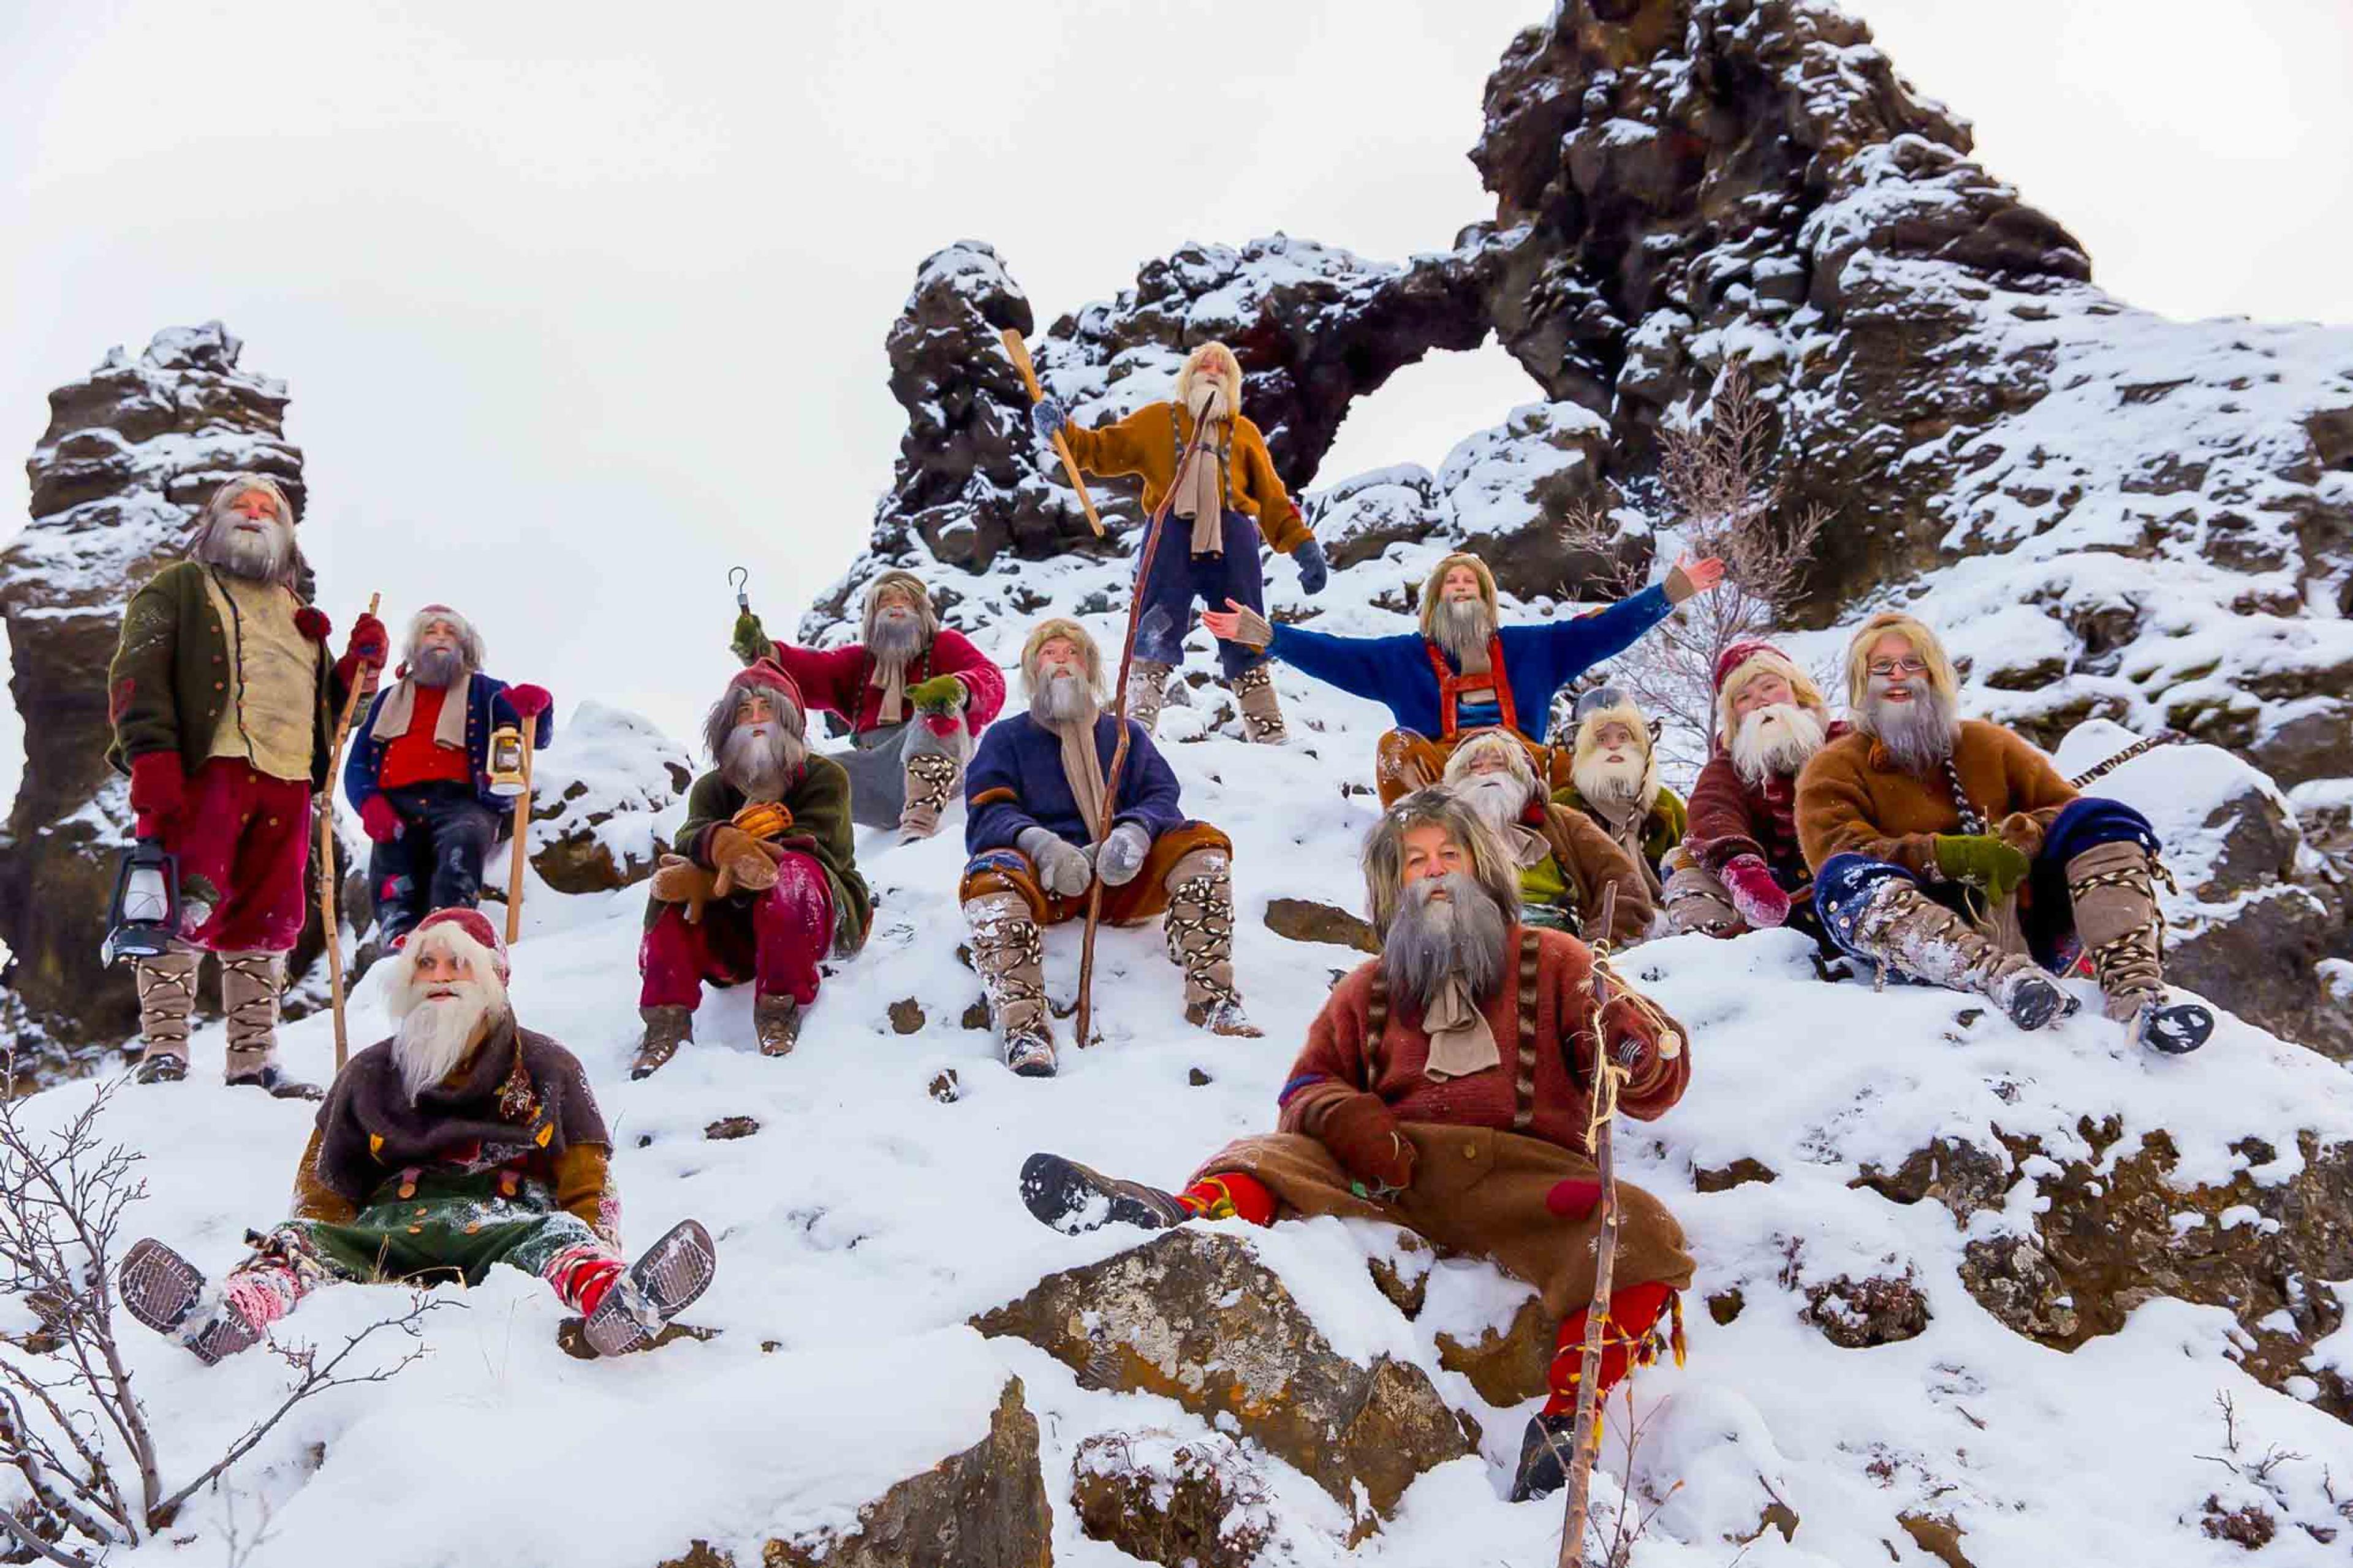 A group of whimsical figures resembling traditional Santa Clauses, each with unique colorful costumes and long beards, posed playfully on a snowy hill with rocky formations in the background, creating a festive and mythical tableau